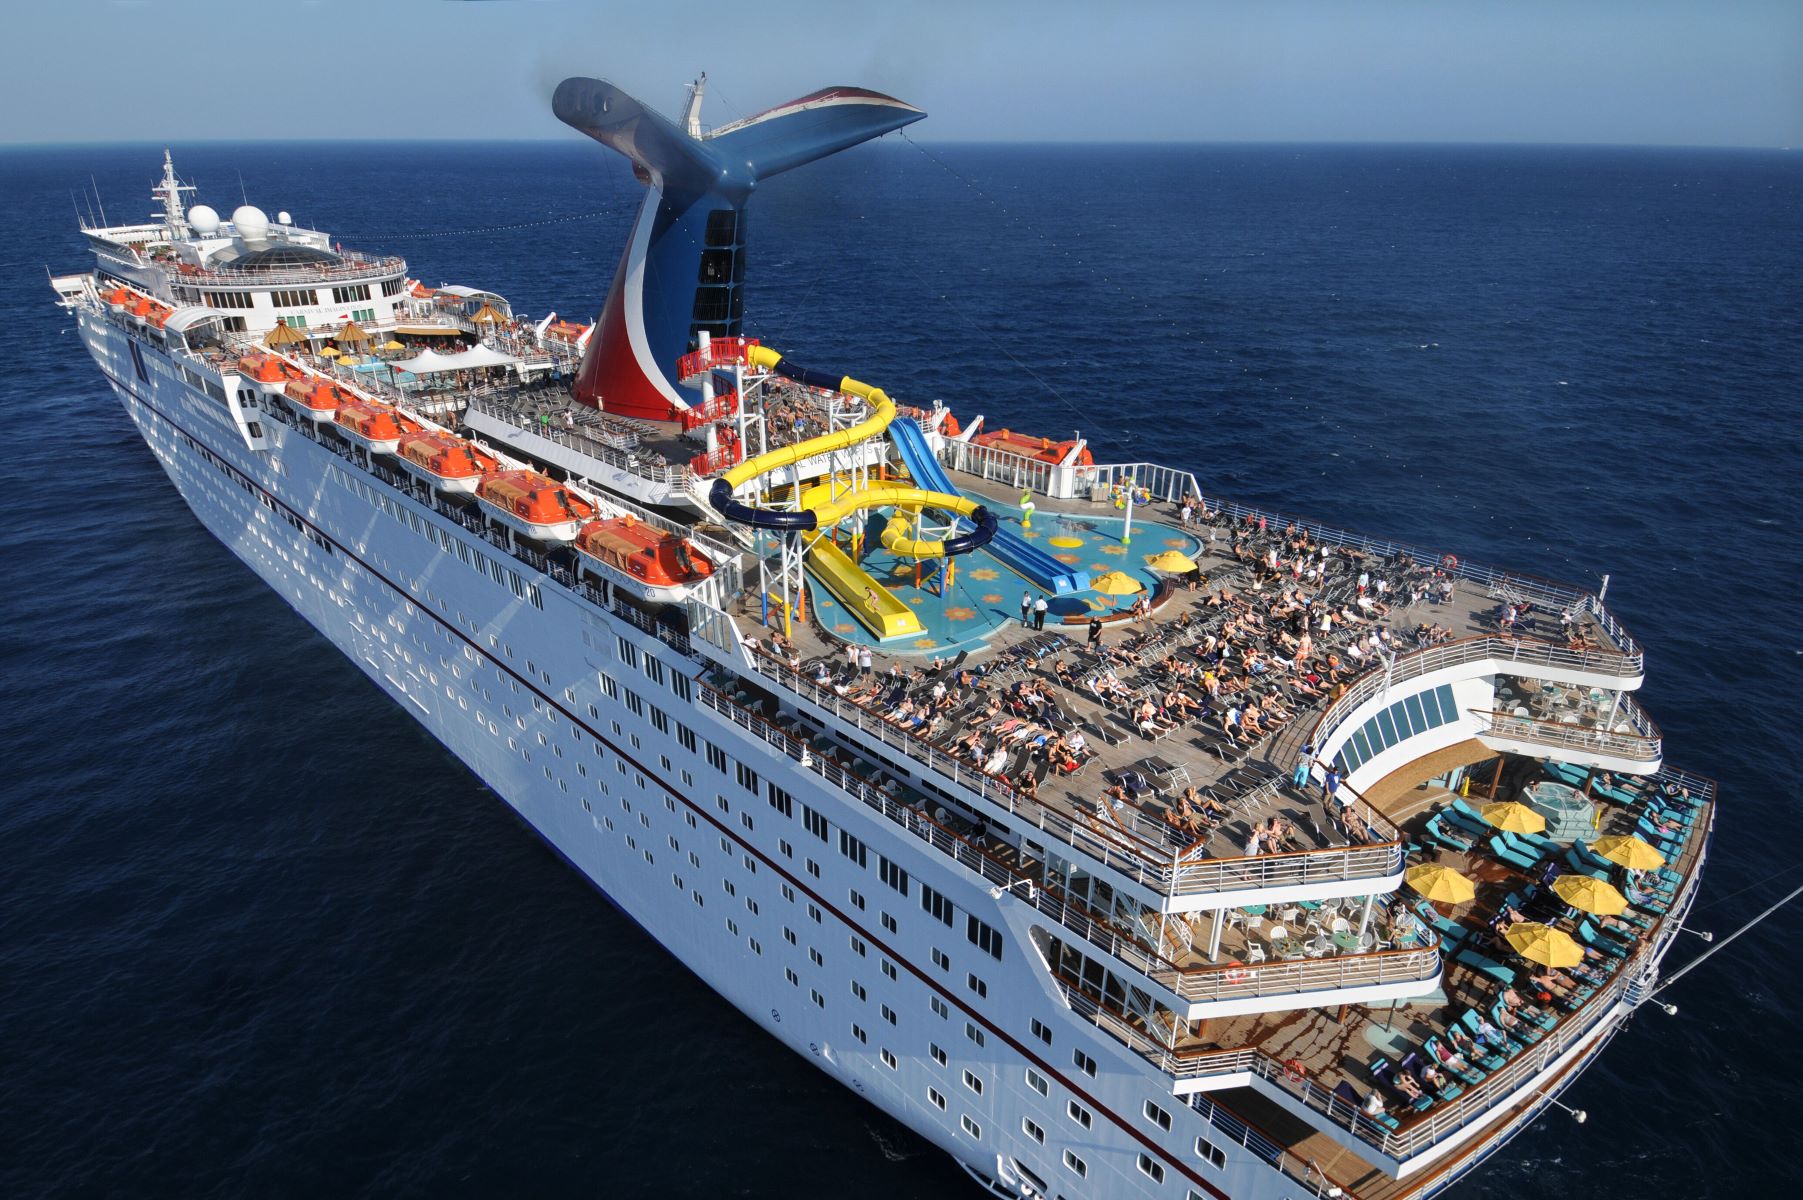 How To Add Credit Card To Carnival Cruise